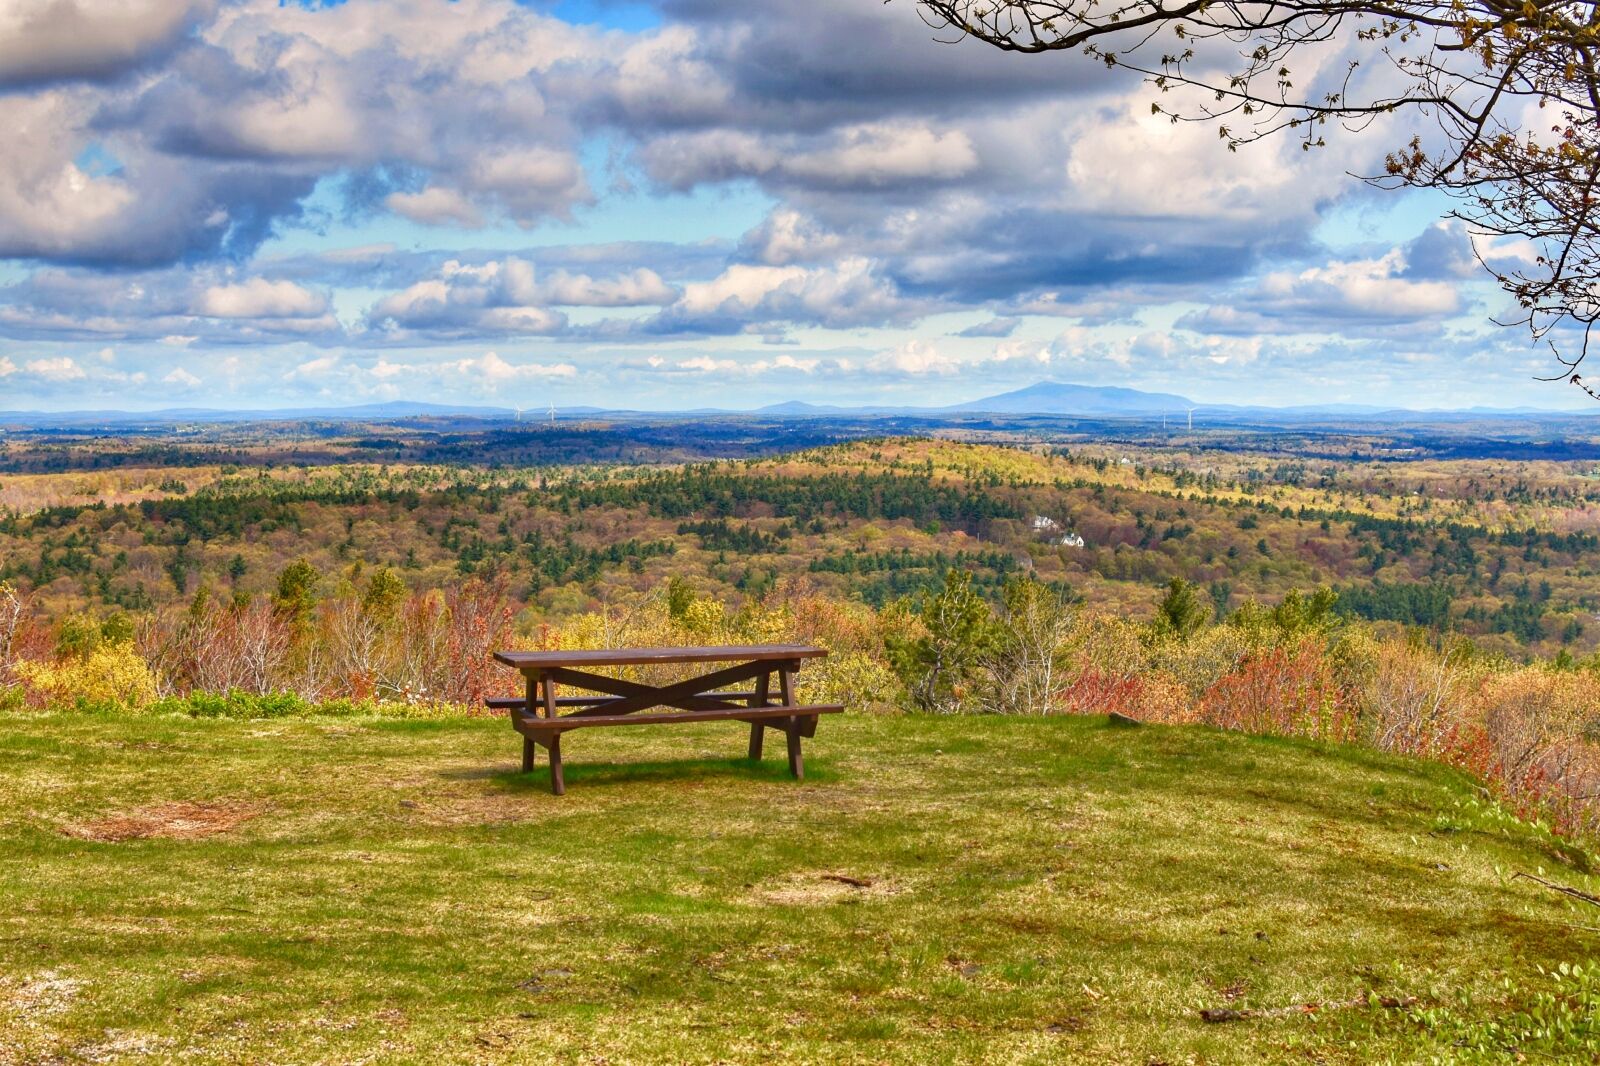 Picnic table with a scenic view of Monadnock Mountain in Wachusett Mountain State Reservation a stop on a Massachusetts Road Trip